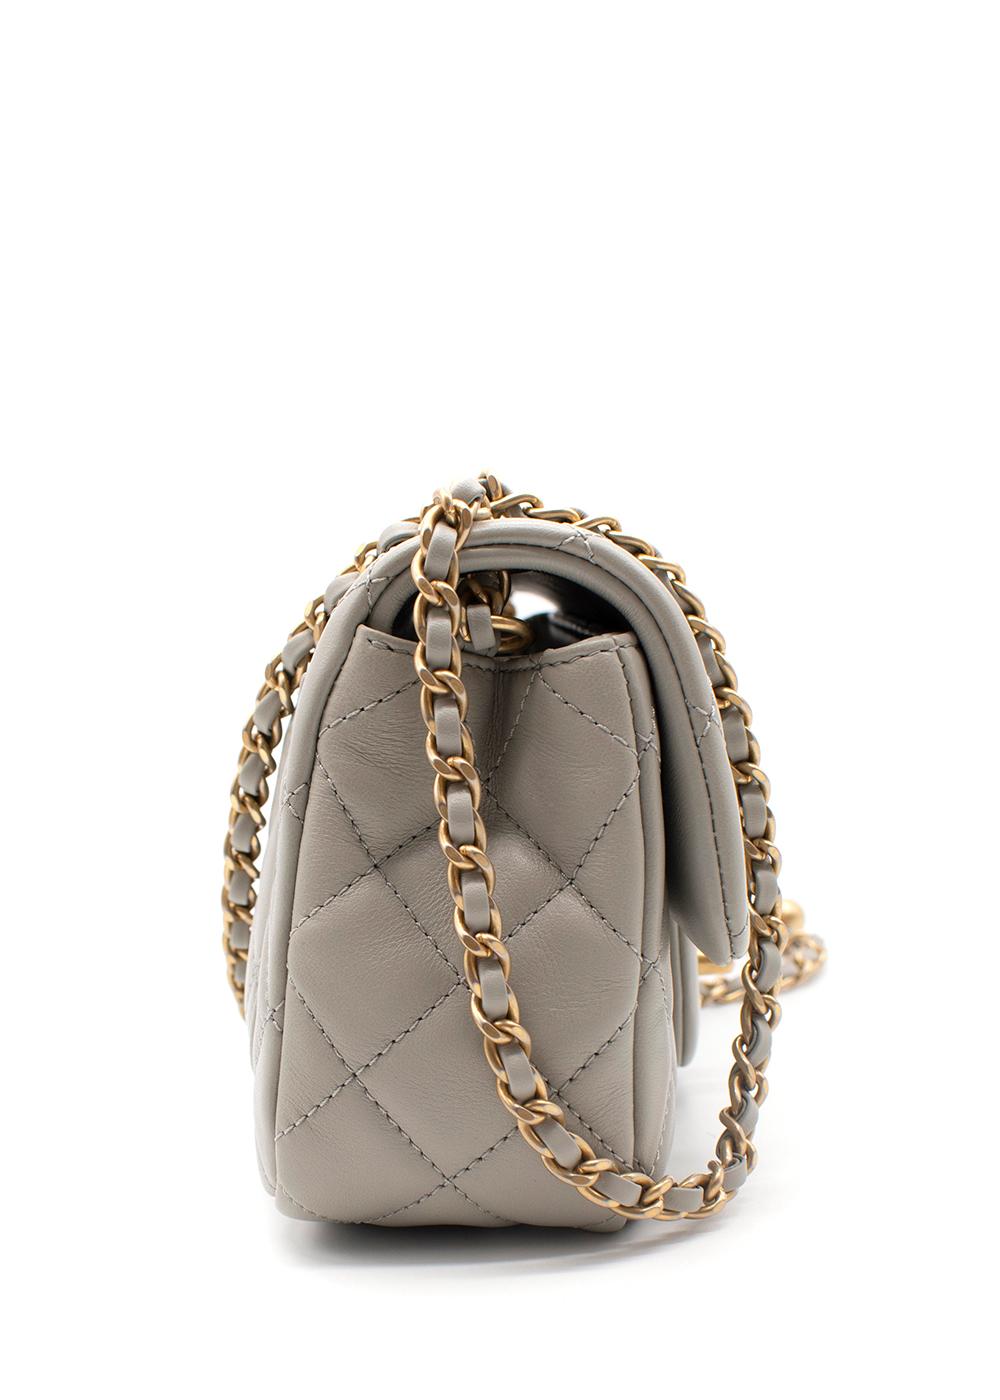 Chanel Grey Quilted Pearl Crush Mini Flap Bag

- Soft lambskin body in a warm pearl grey hue with signature diamond quilting 
- Flap top with CC turnlock closure 
- Leather and chain strap with decorative faux gold-tone metal orb
- Opens to